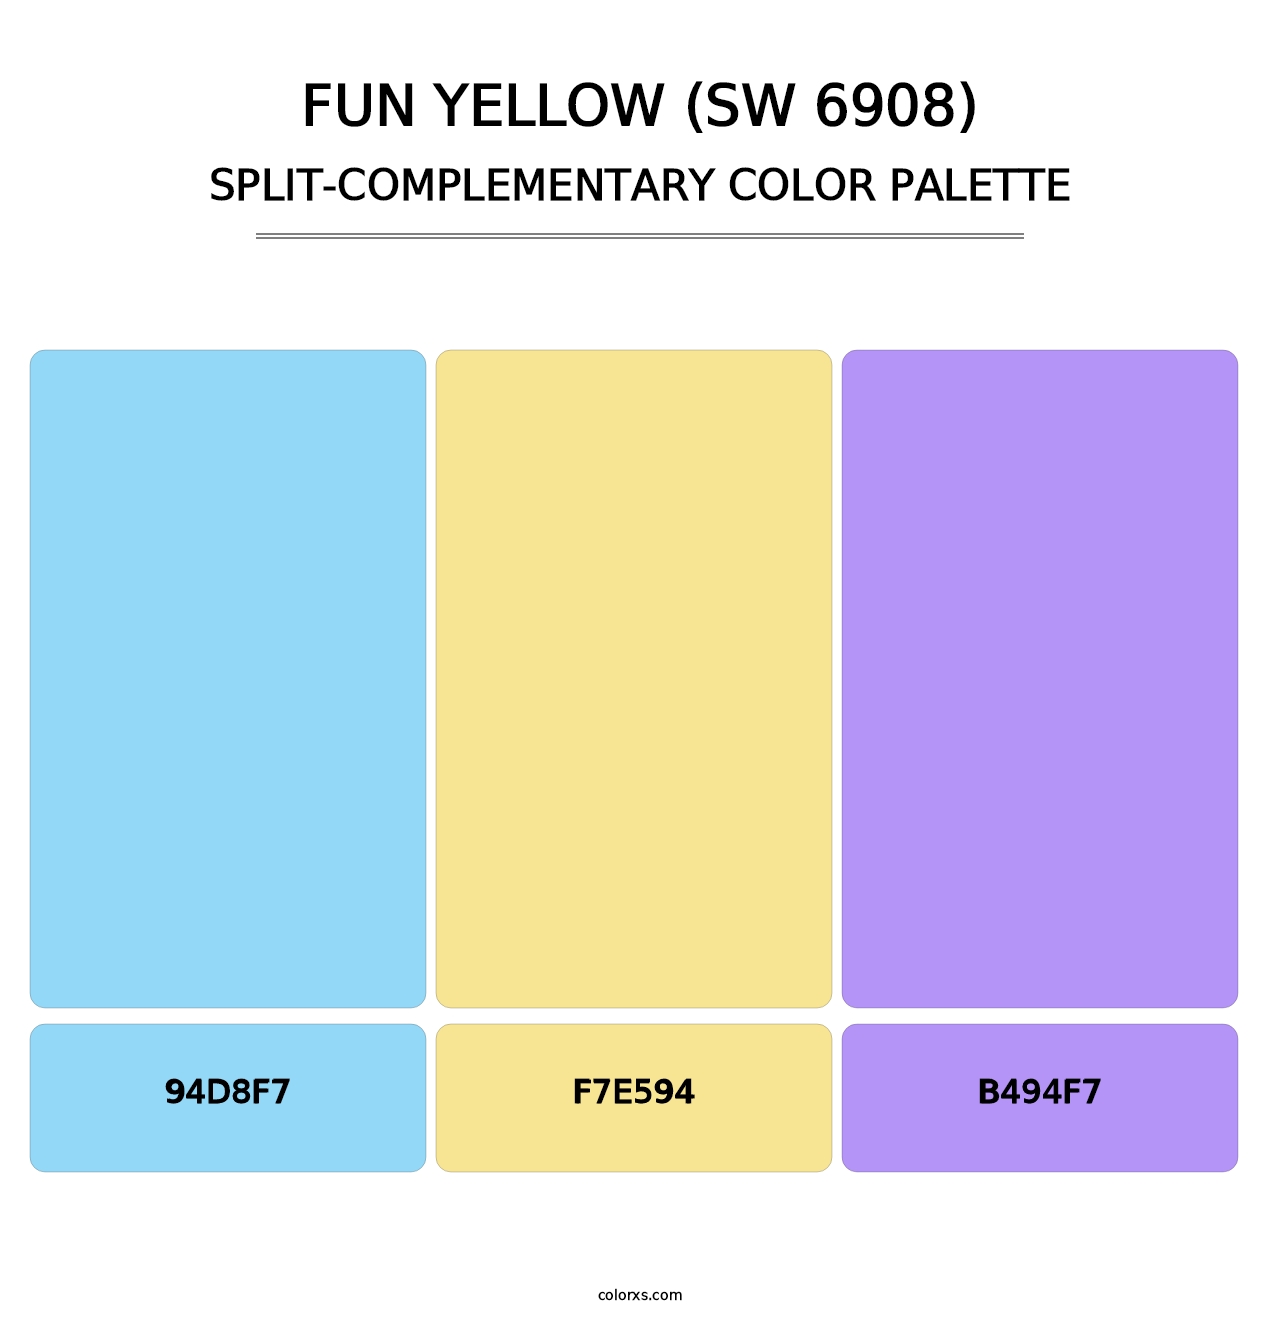 Fun Yellow (SW 6908) - Split-Complementary Color Palette